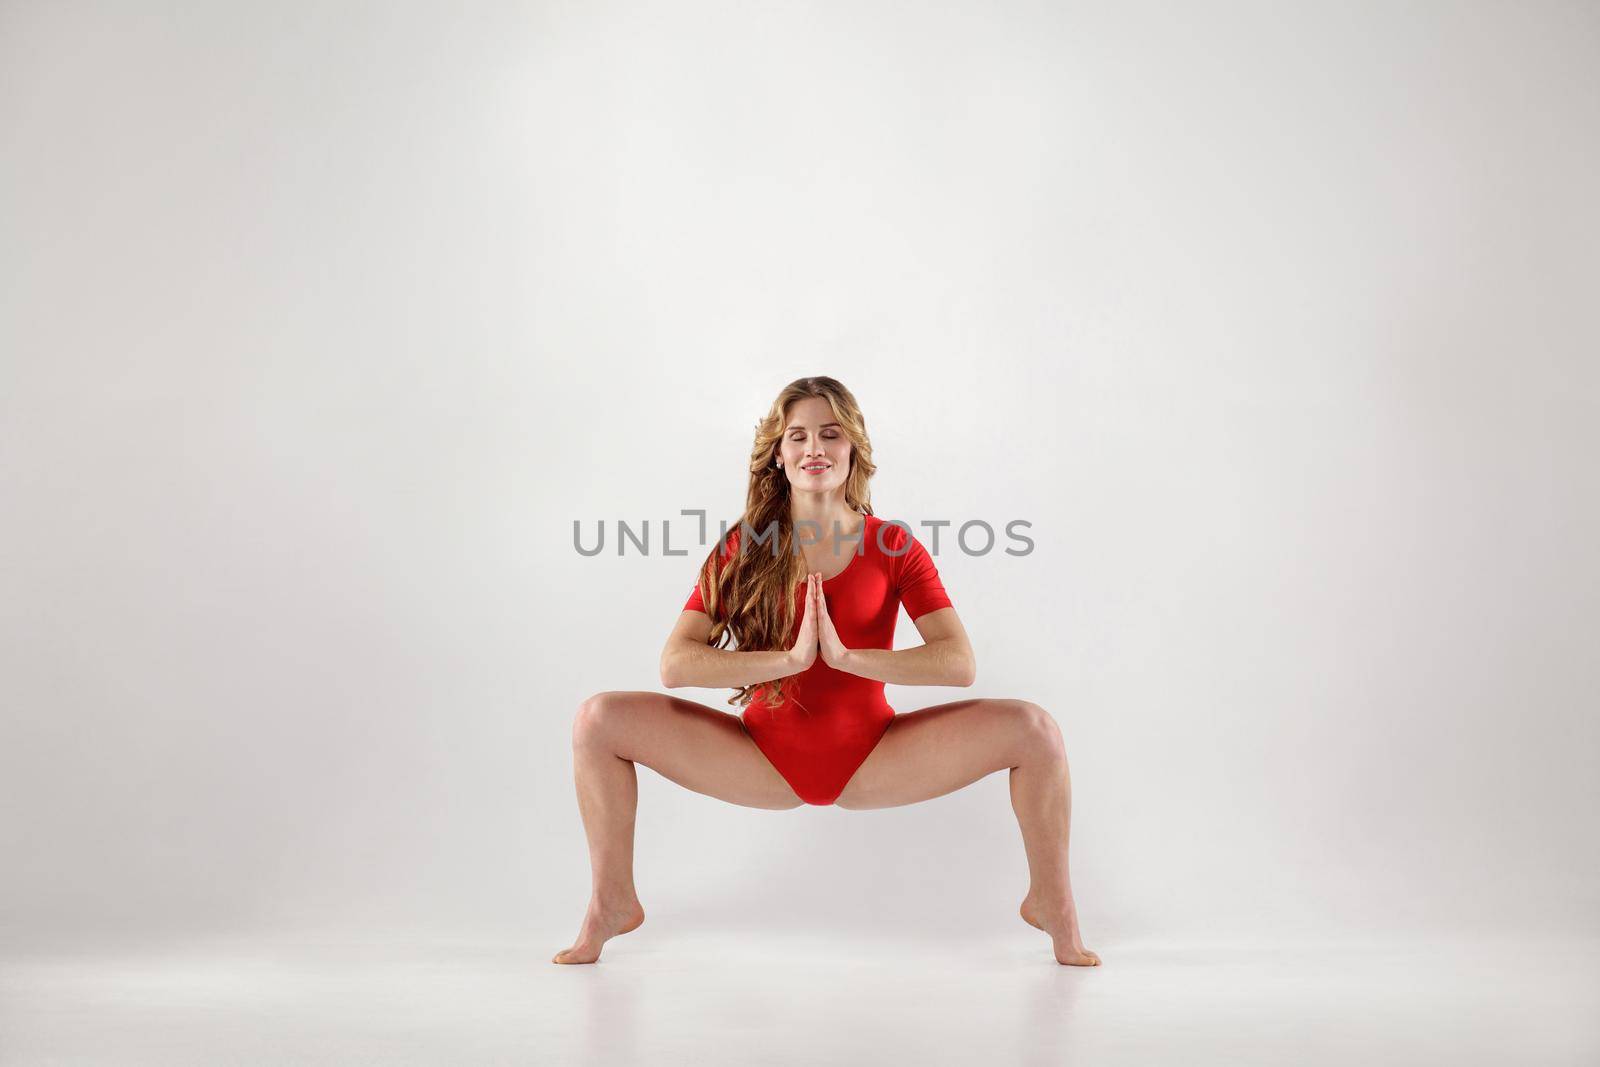 attractive athletic curly blonde woman with makeup in red leotard doing yoga pose .isolated indoor studio shot on light gray background. healthy lifestyle and leisure activity concept.